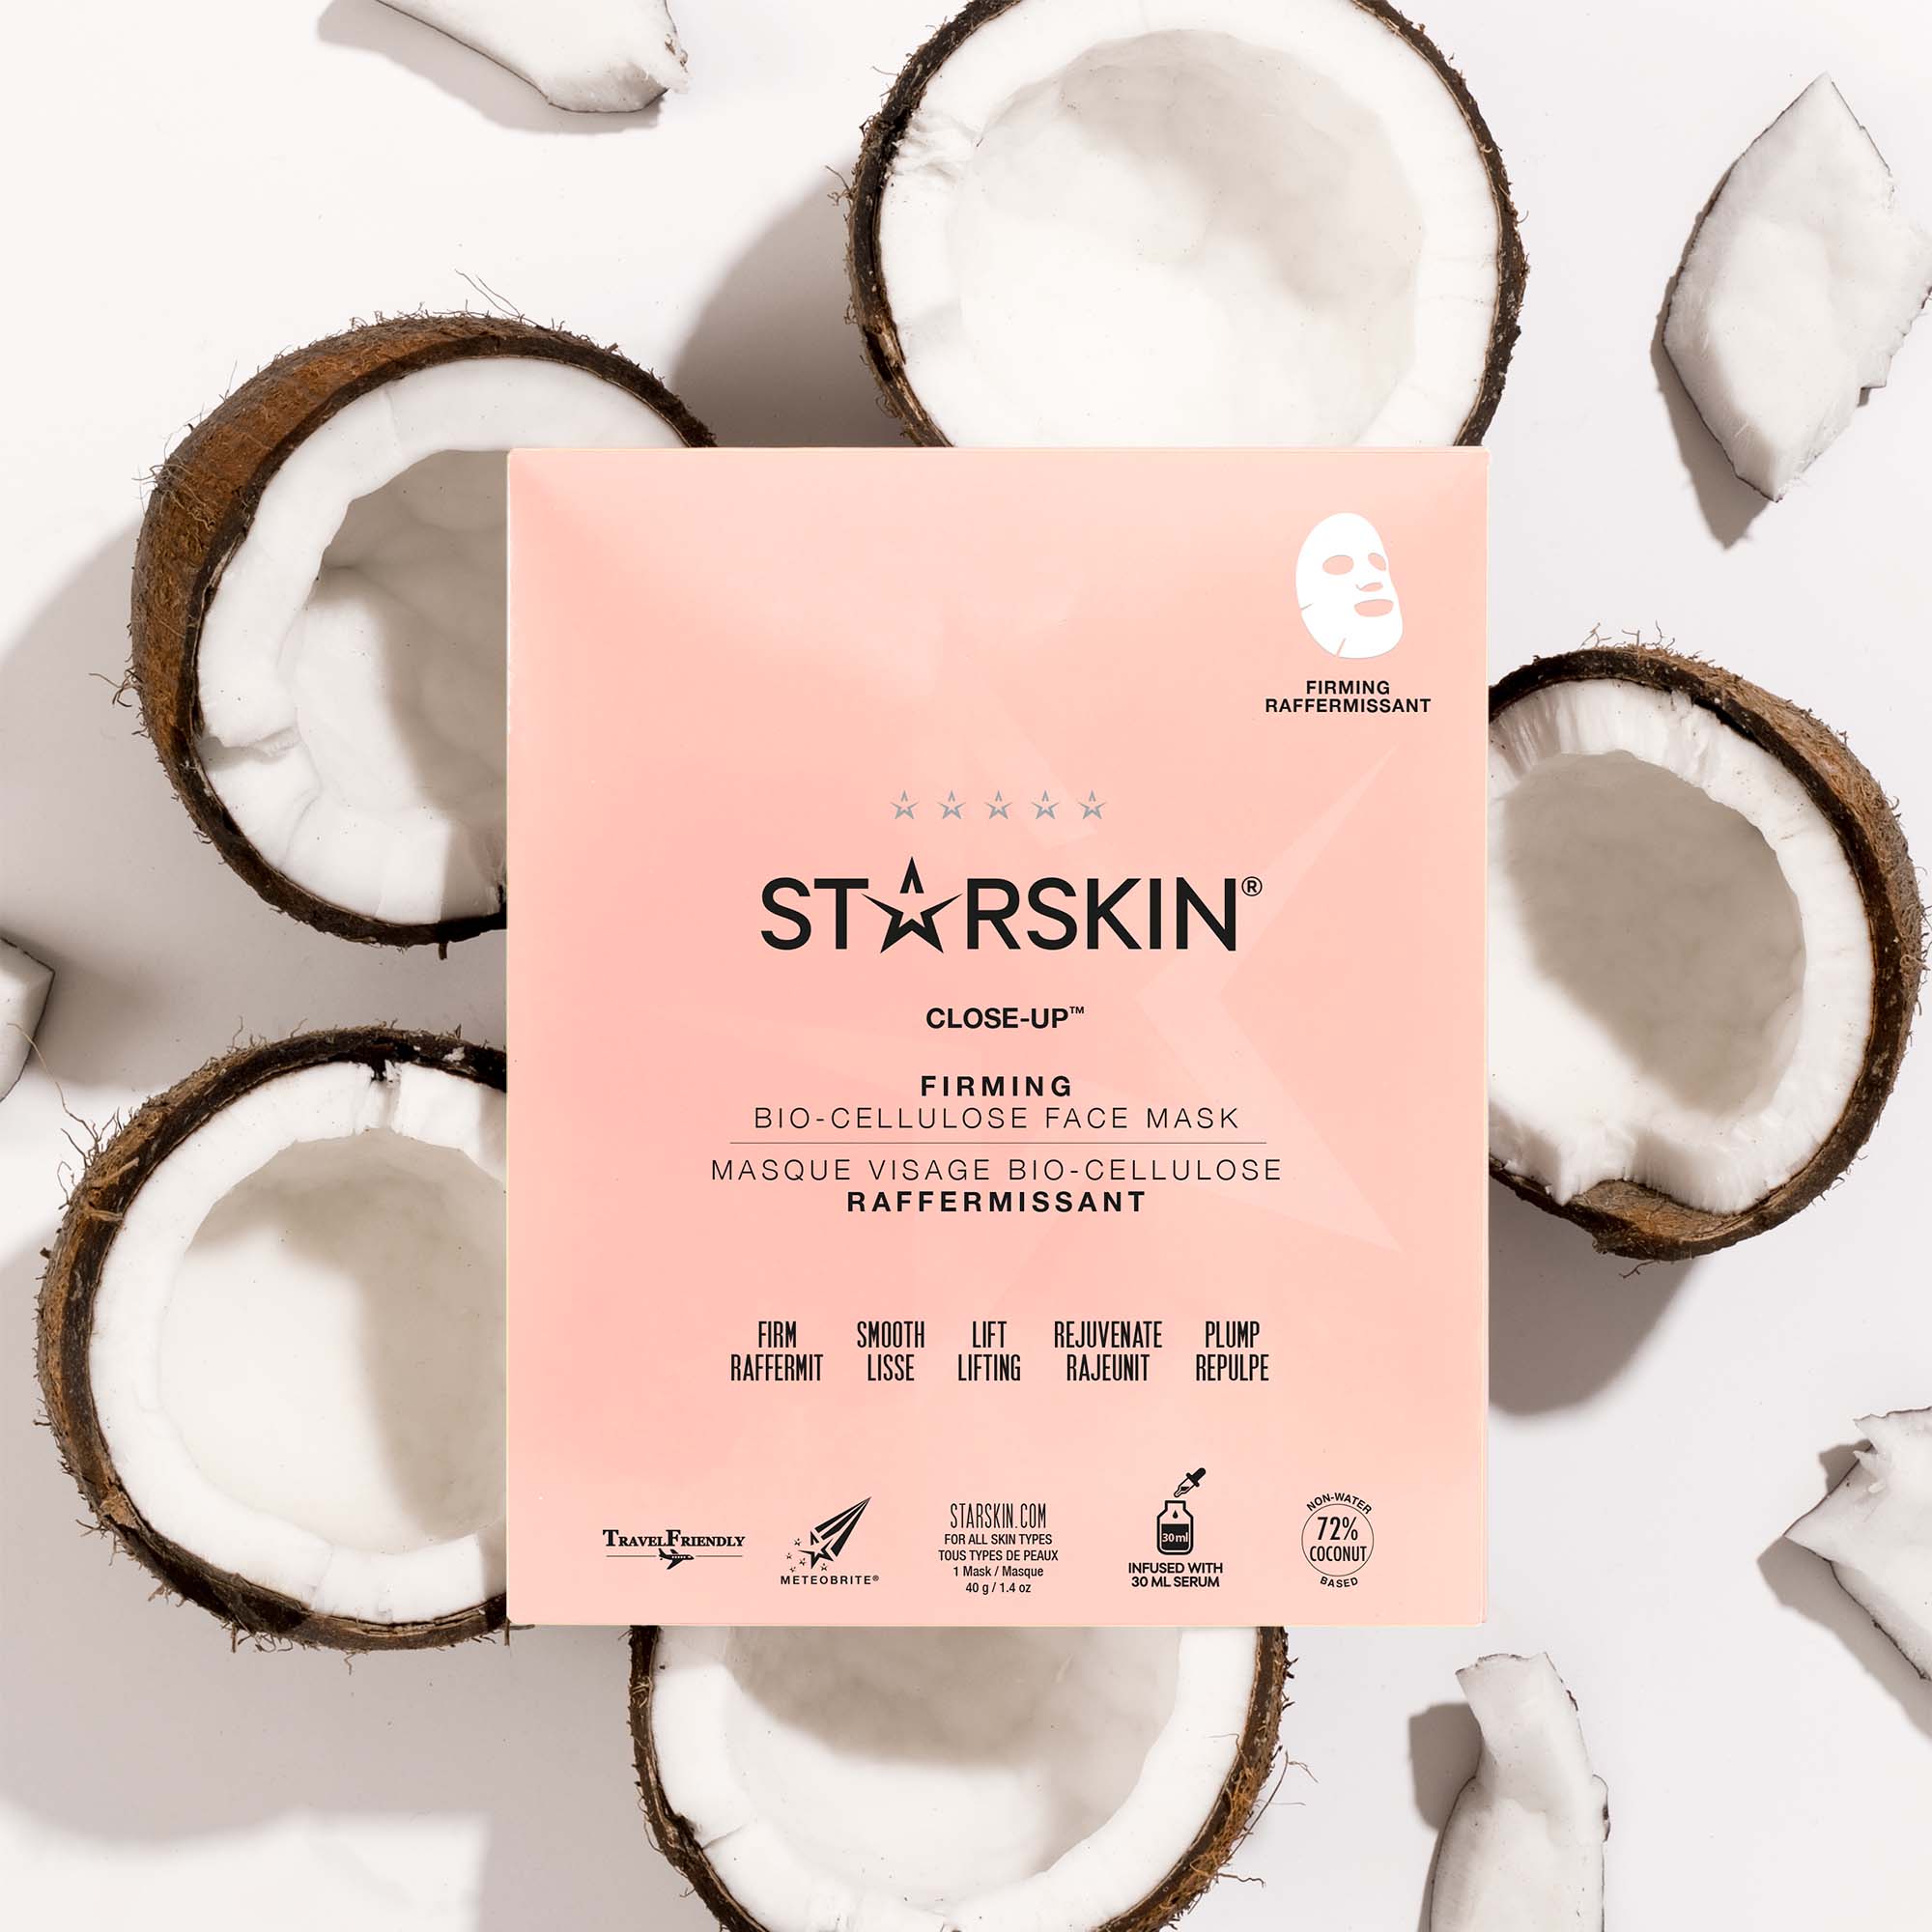 Product packaging of Starskin's Close up face sheet mask. The product is on top of coconuts.